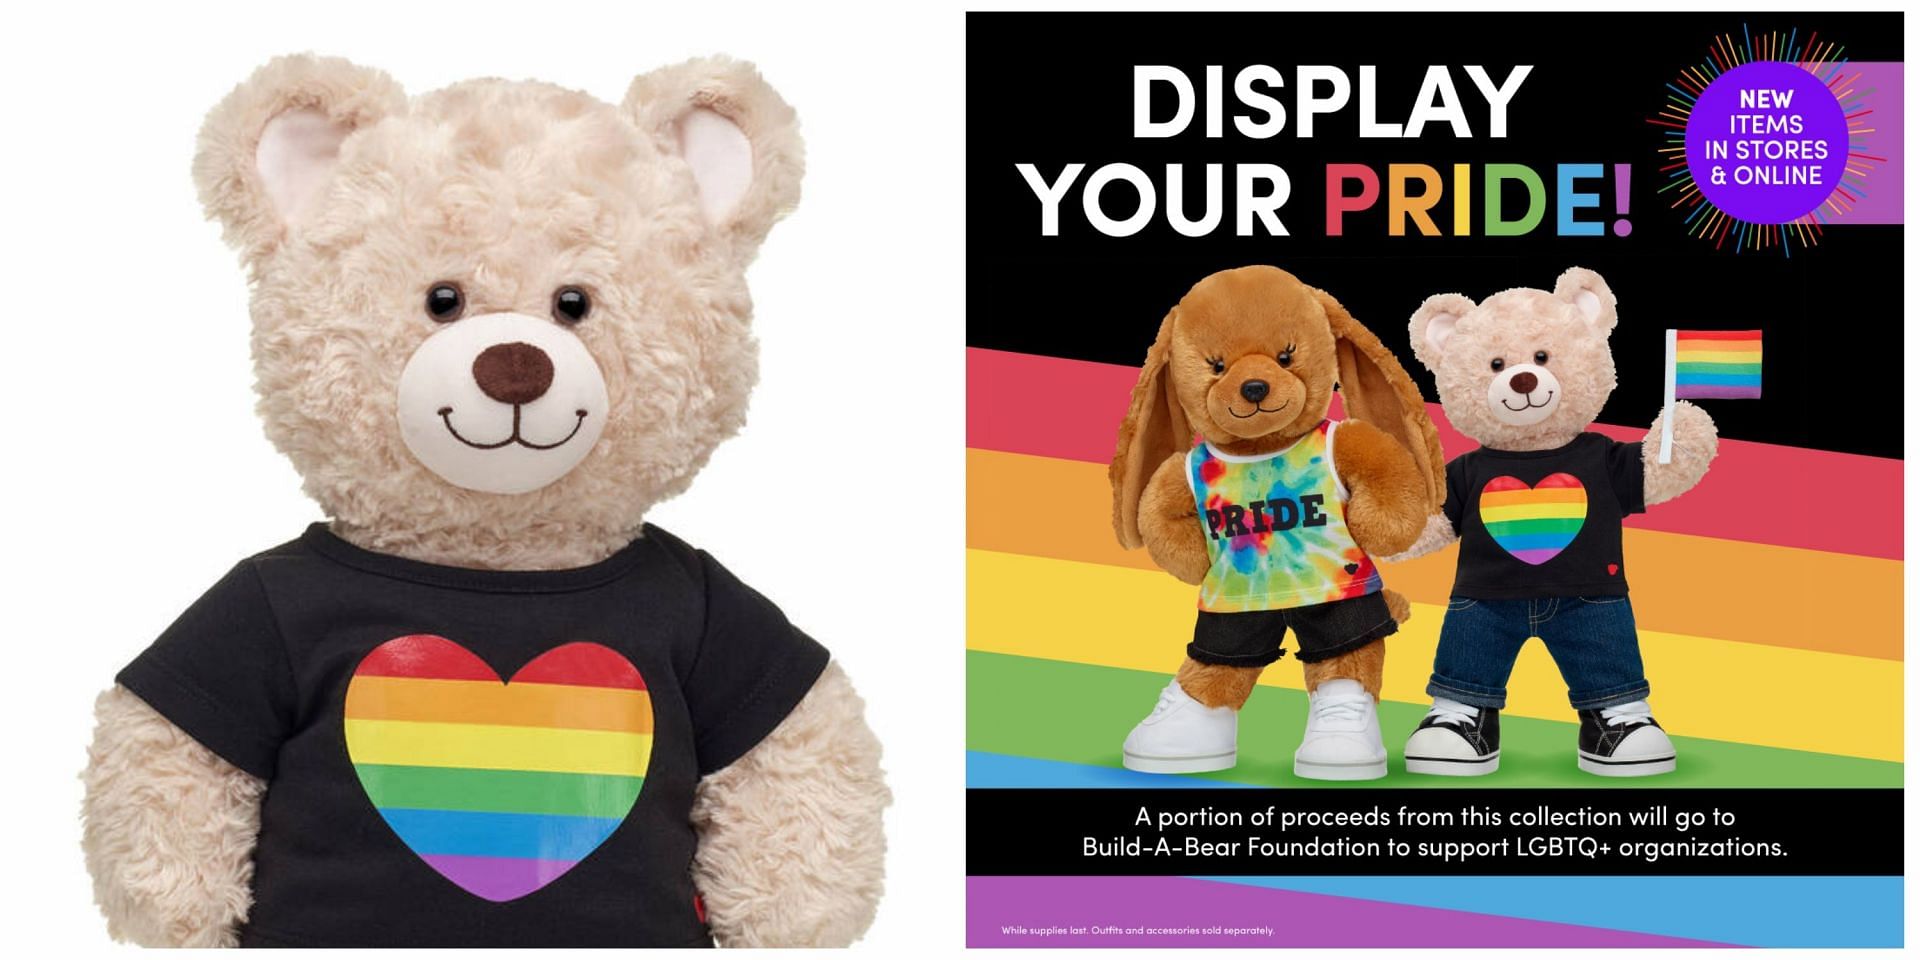 Build A Bear comes under fire for launching Pride Merchandise: Social media users reactions explored. (Image via Build-A-Bear)